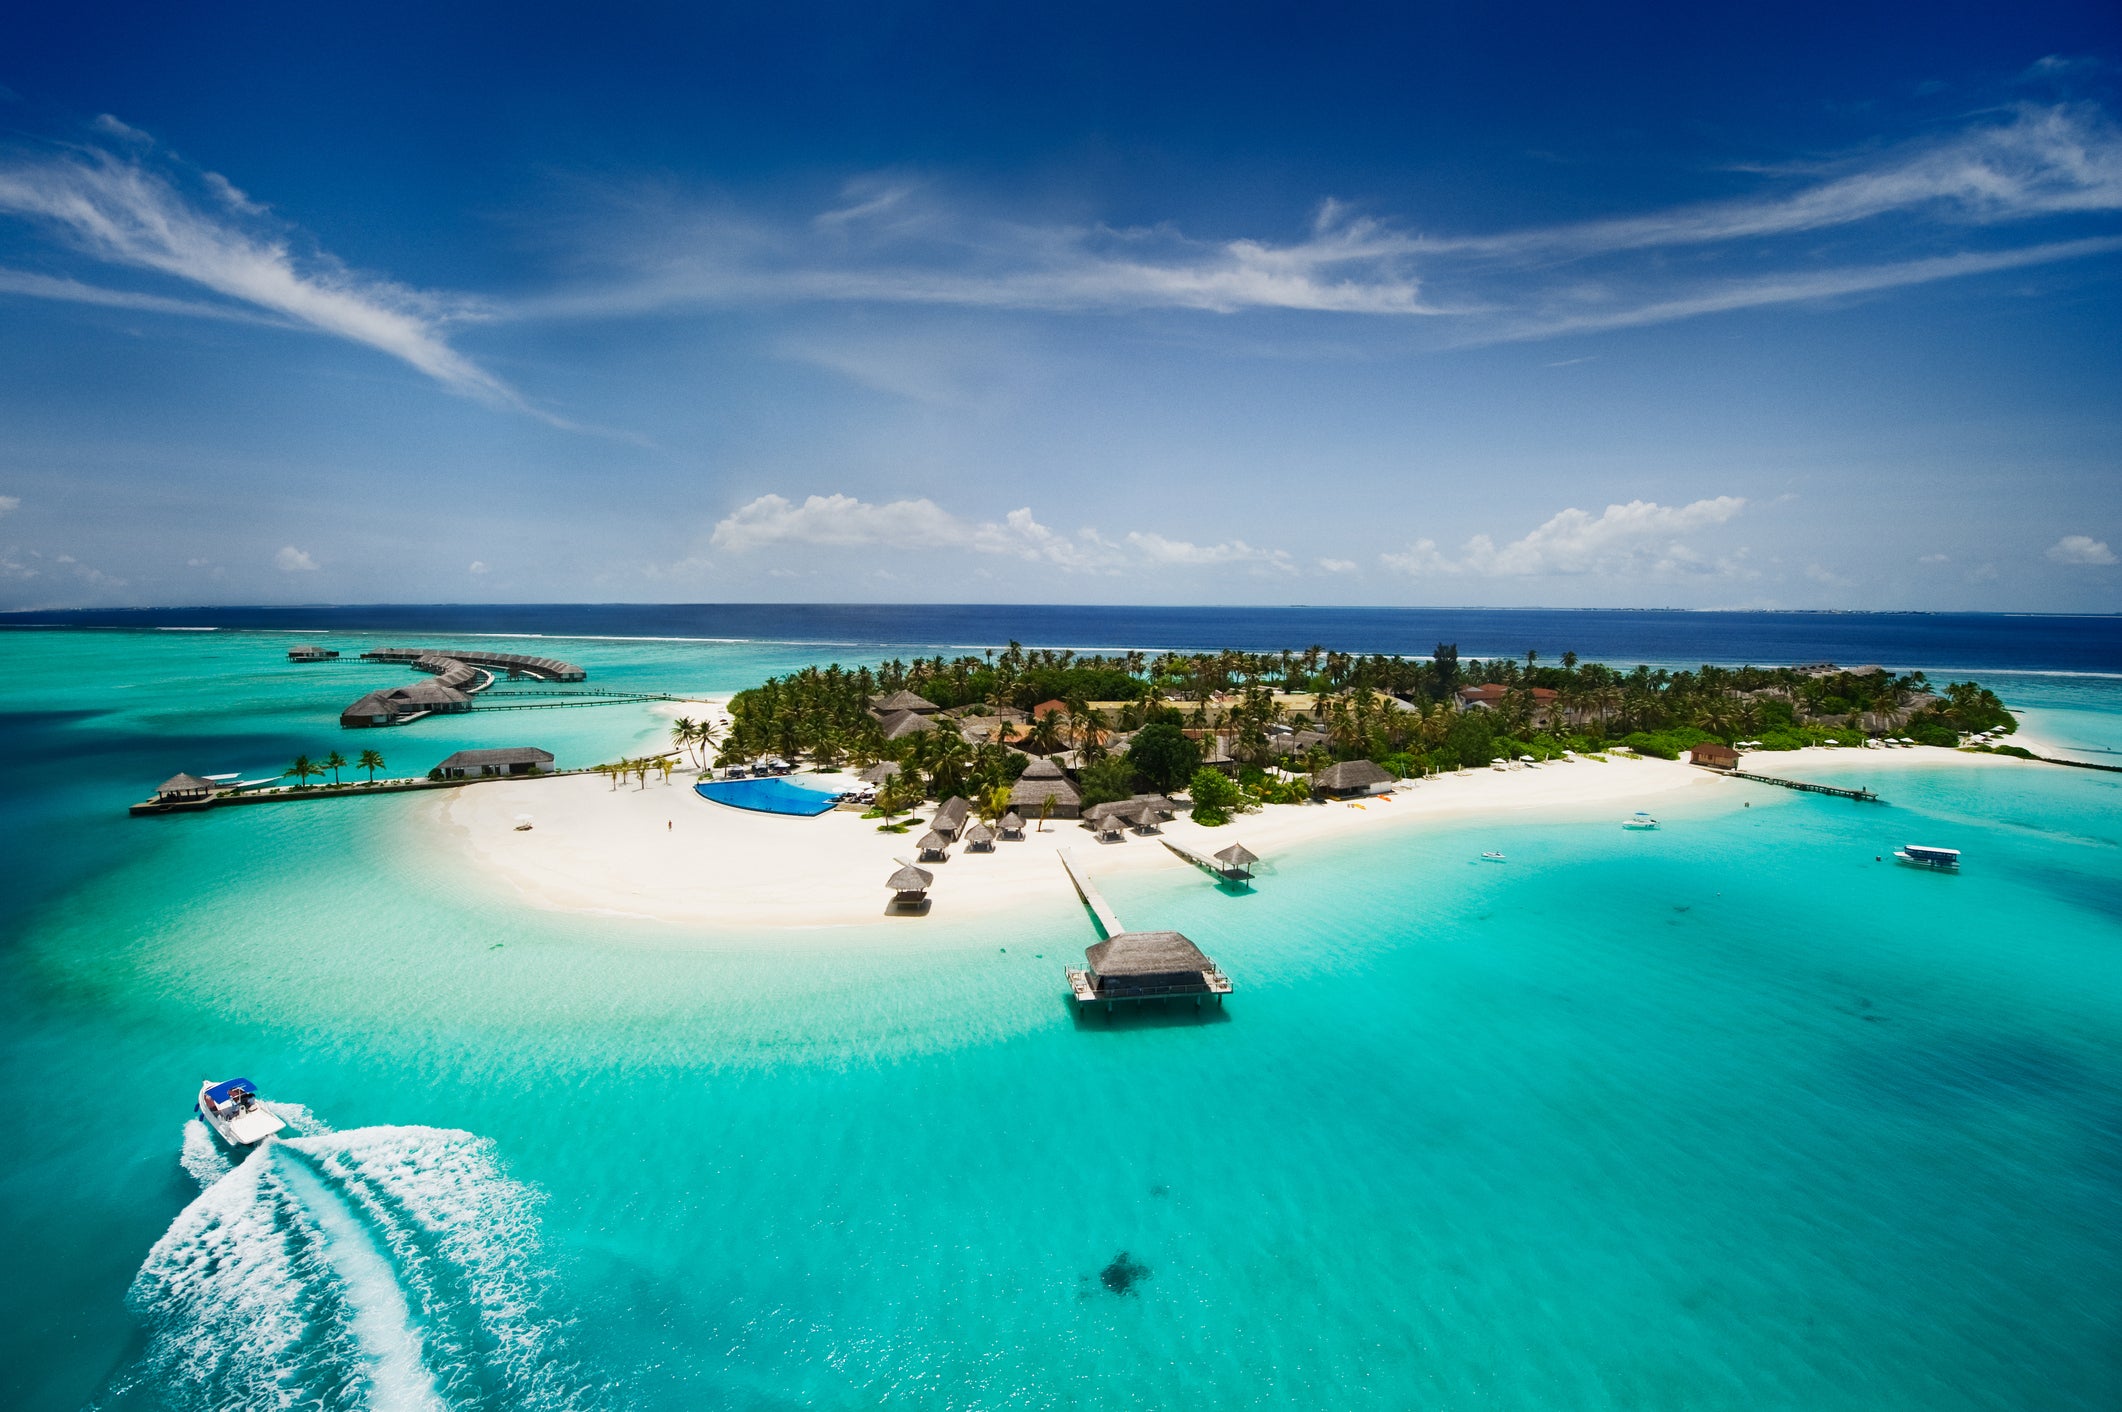 Swim in some of the world's clearest turquoise waters in the Maldives (iStock)